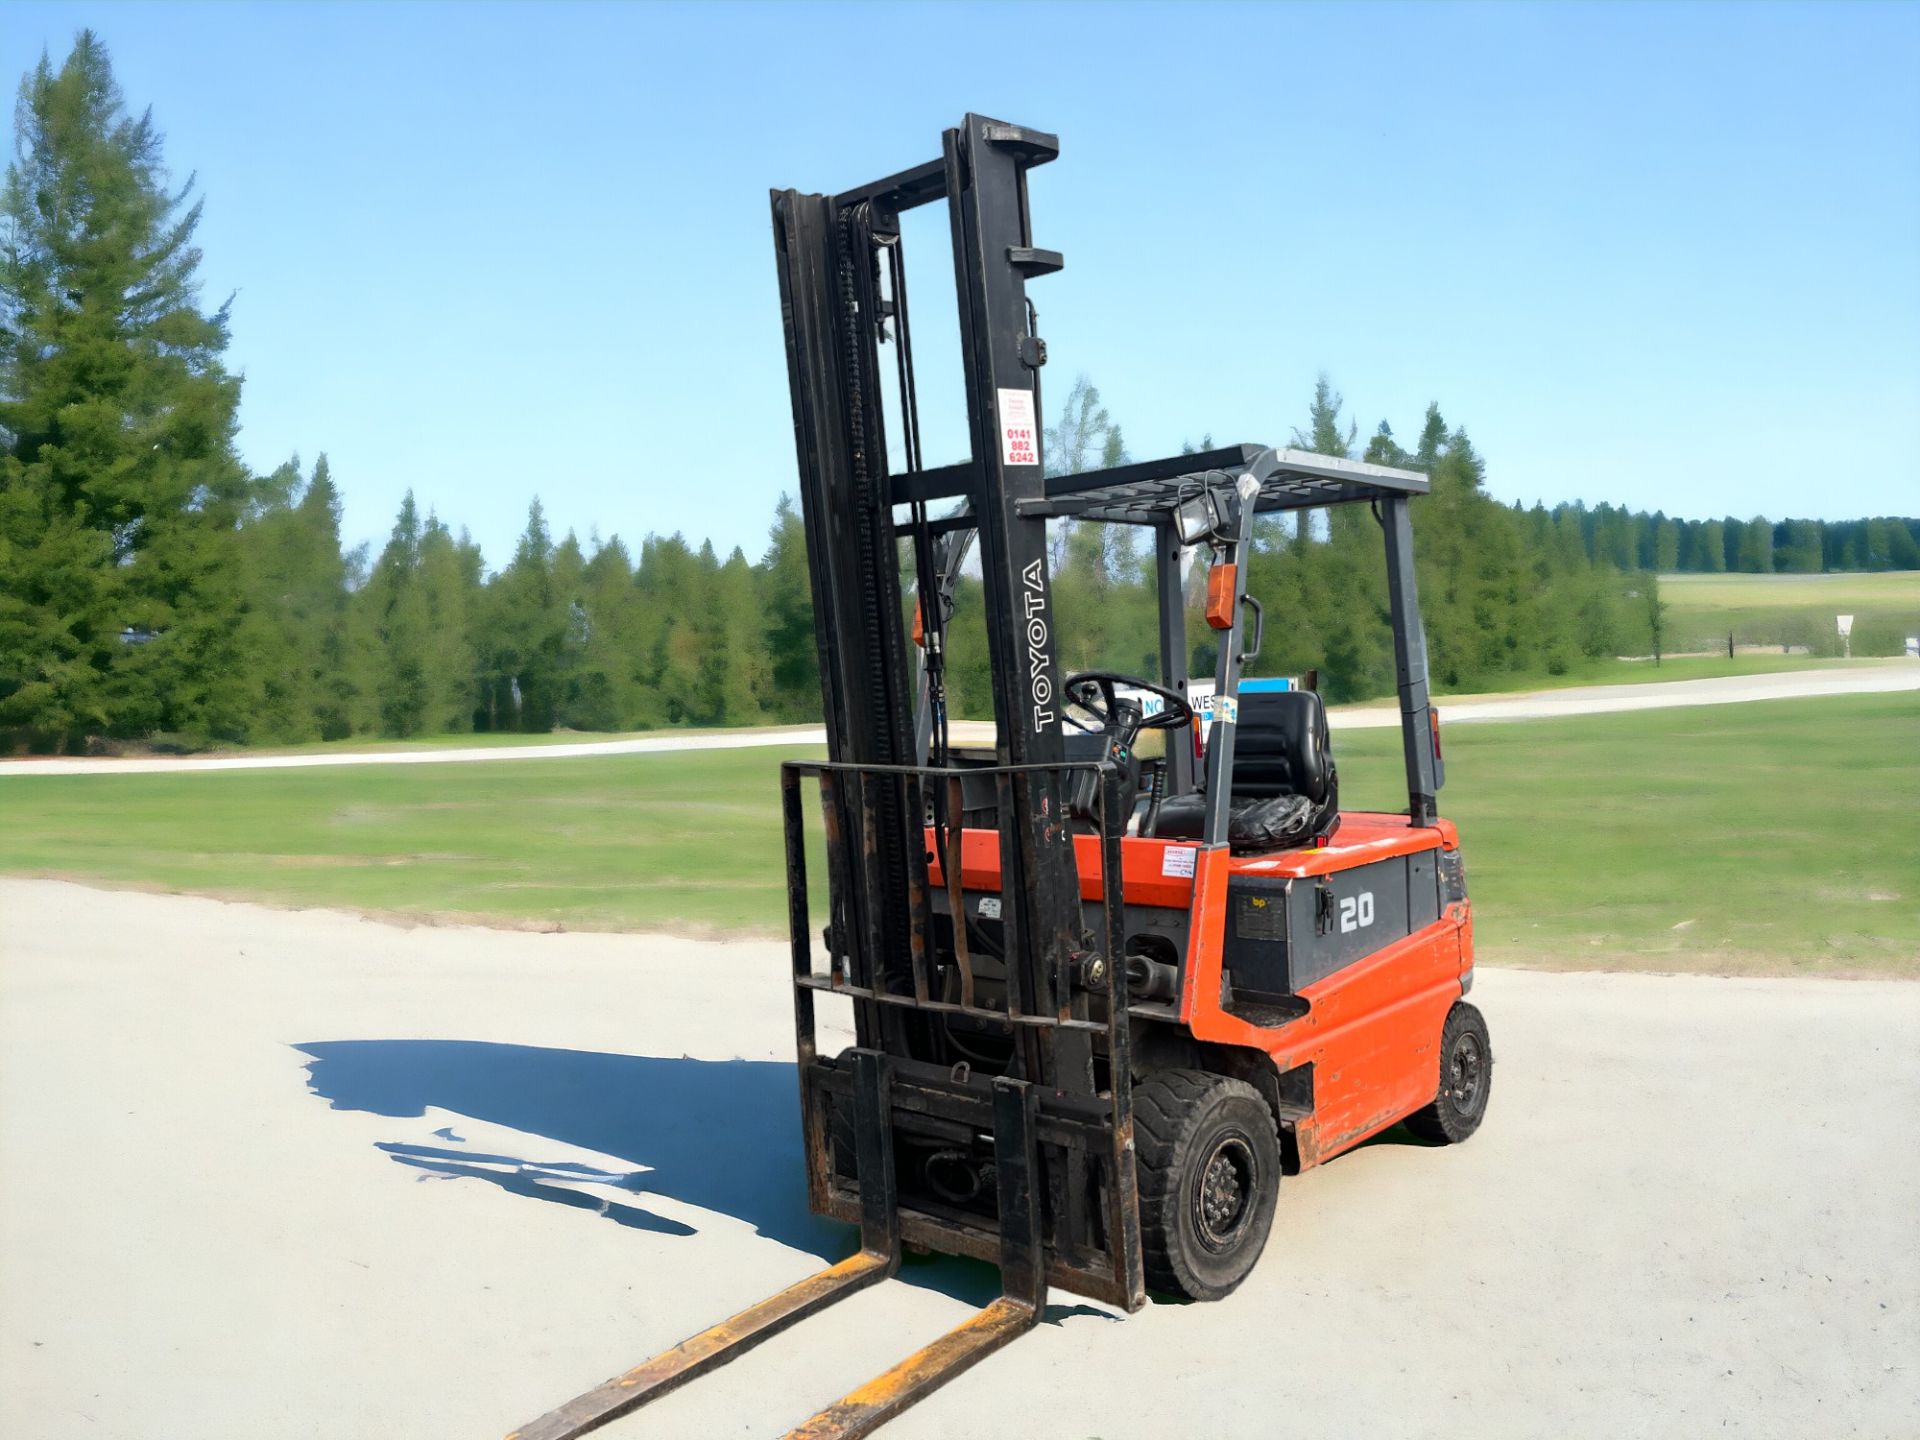 TOYOTA ELECTRIC 4-WHEEL FORKLIFT - FBM20 (2000) **(INCLUDES CHARGER)** - Image 2 of 7